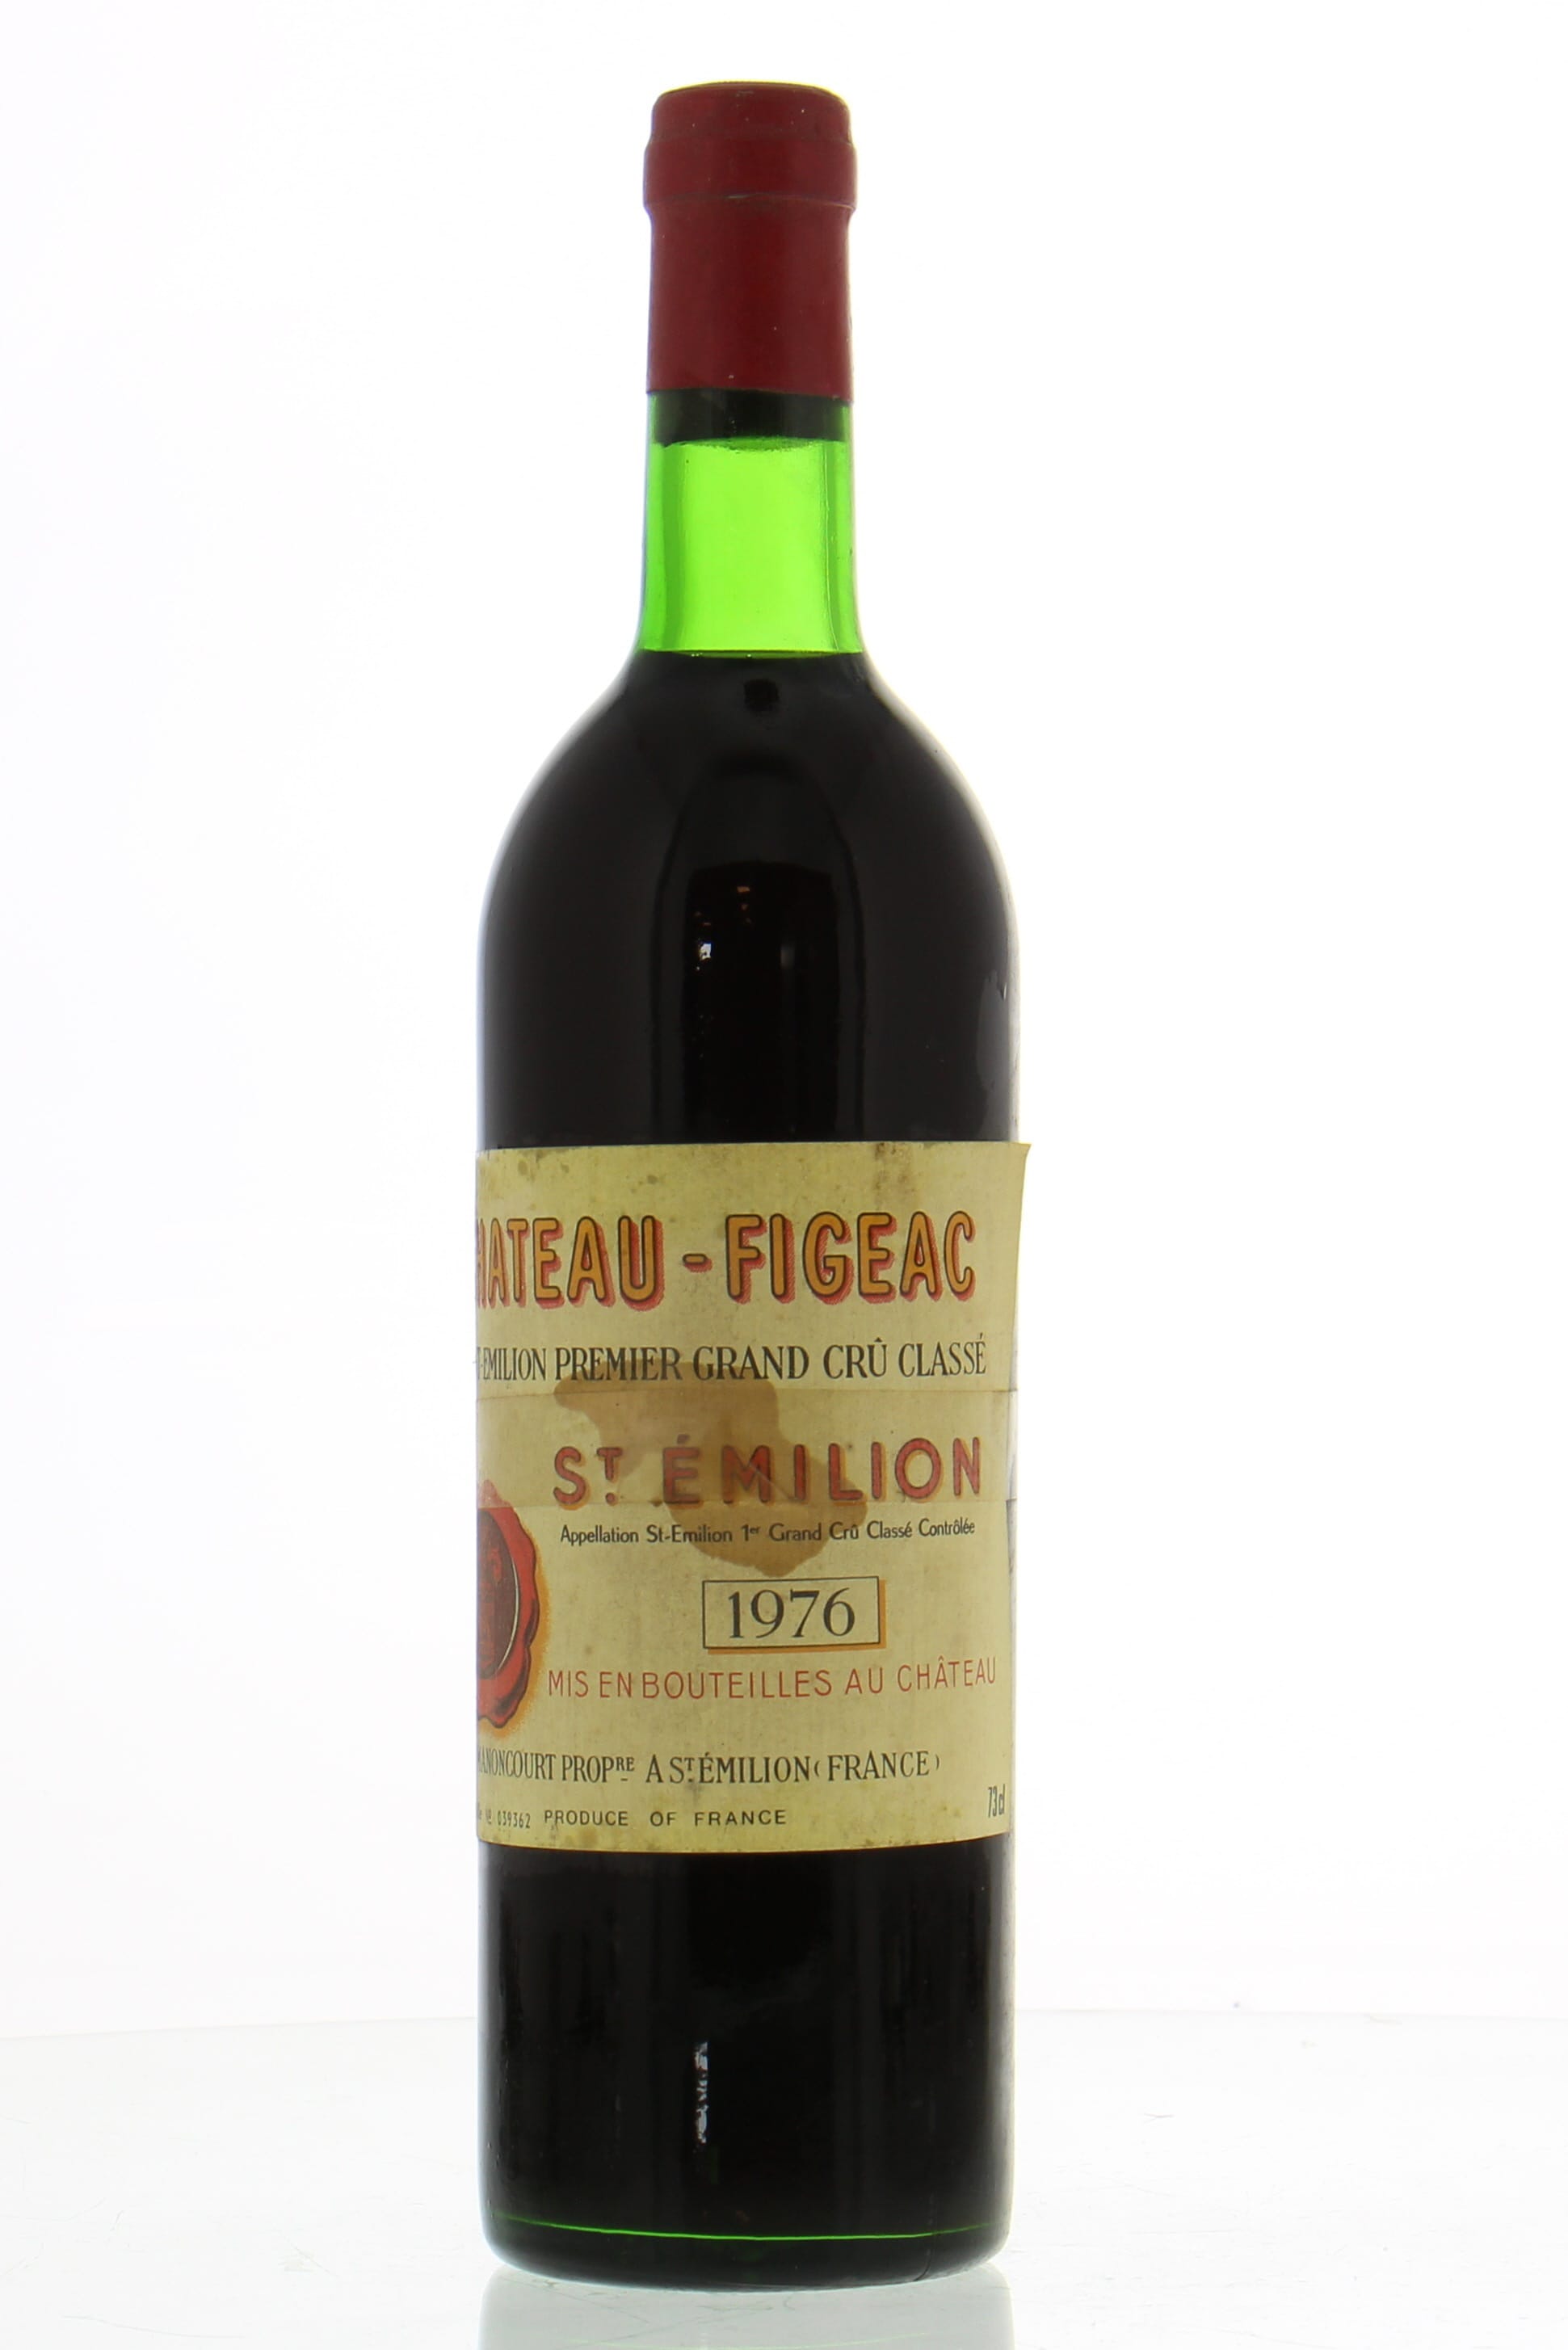 Chateau Figeac - Chateau Figeac 1976 Top Shoulder or better